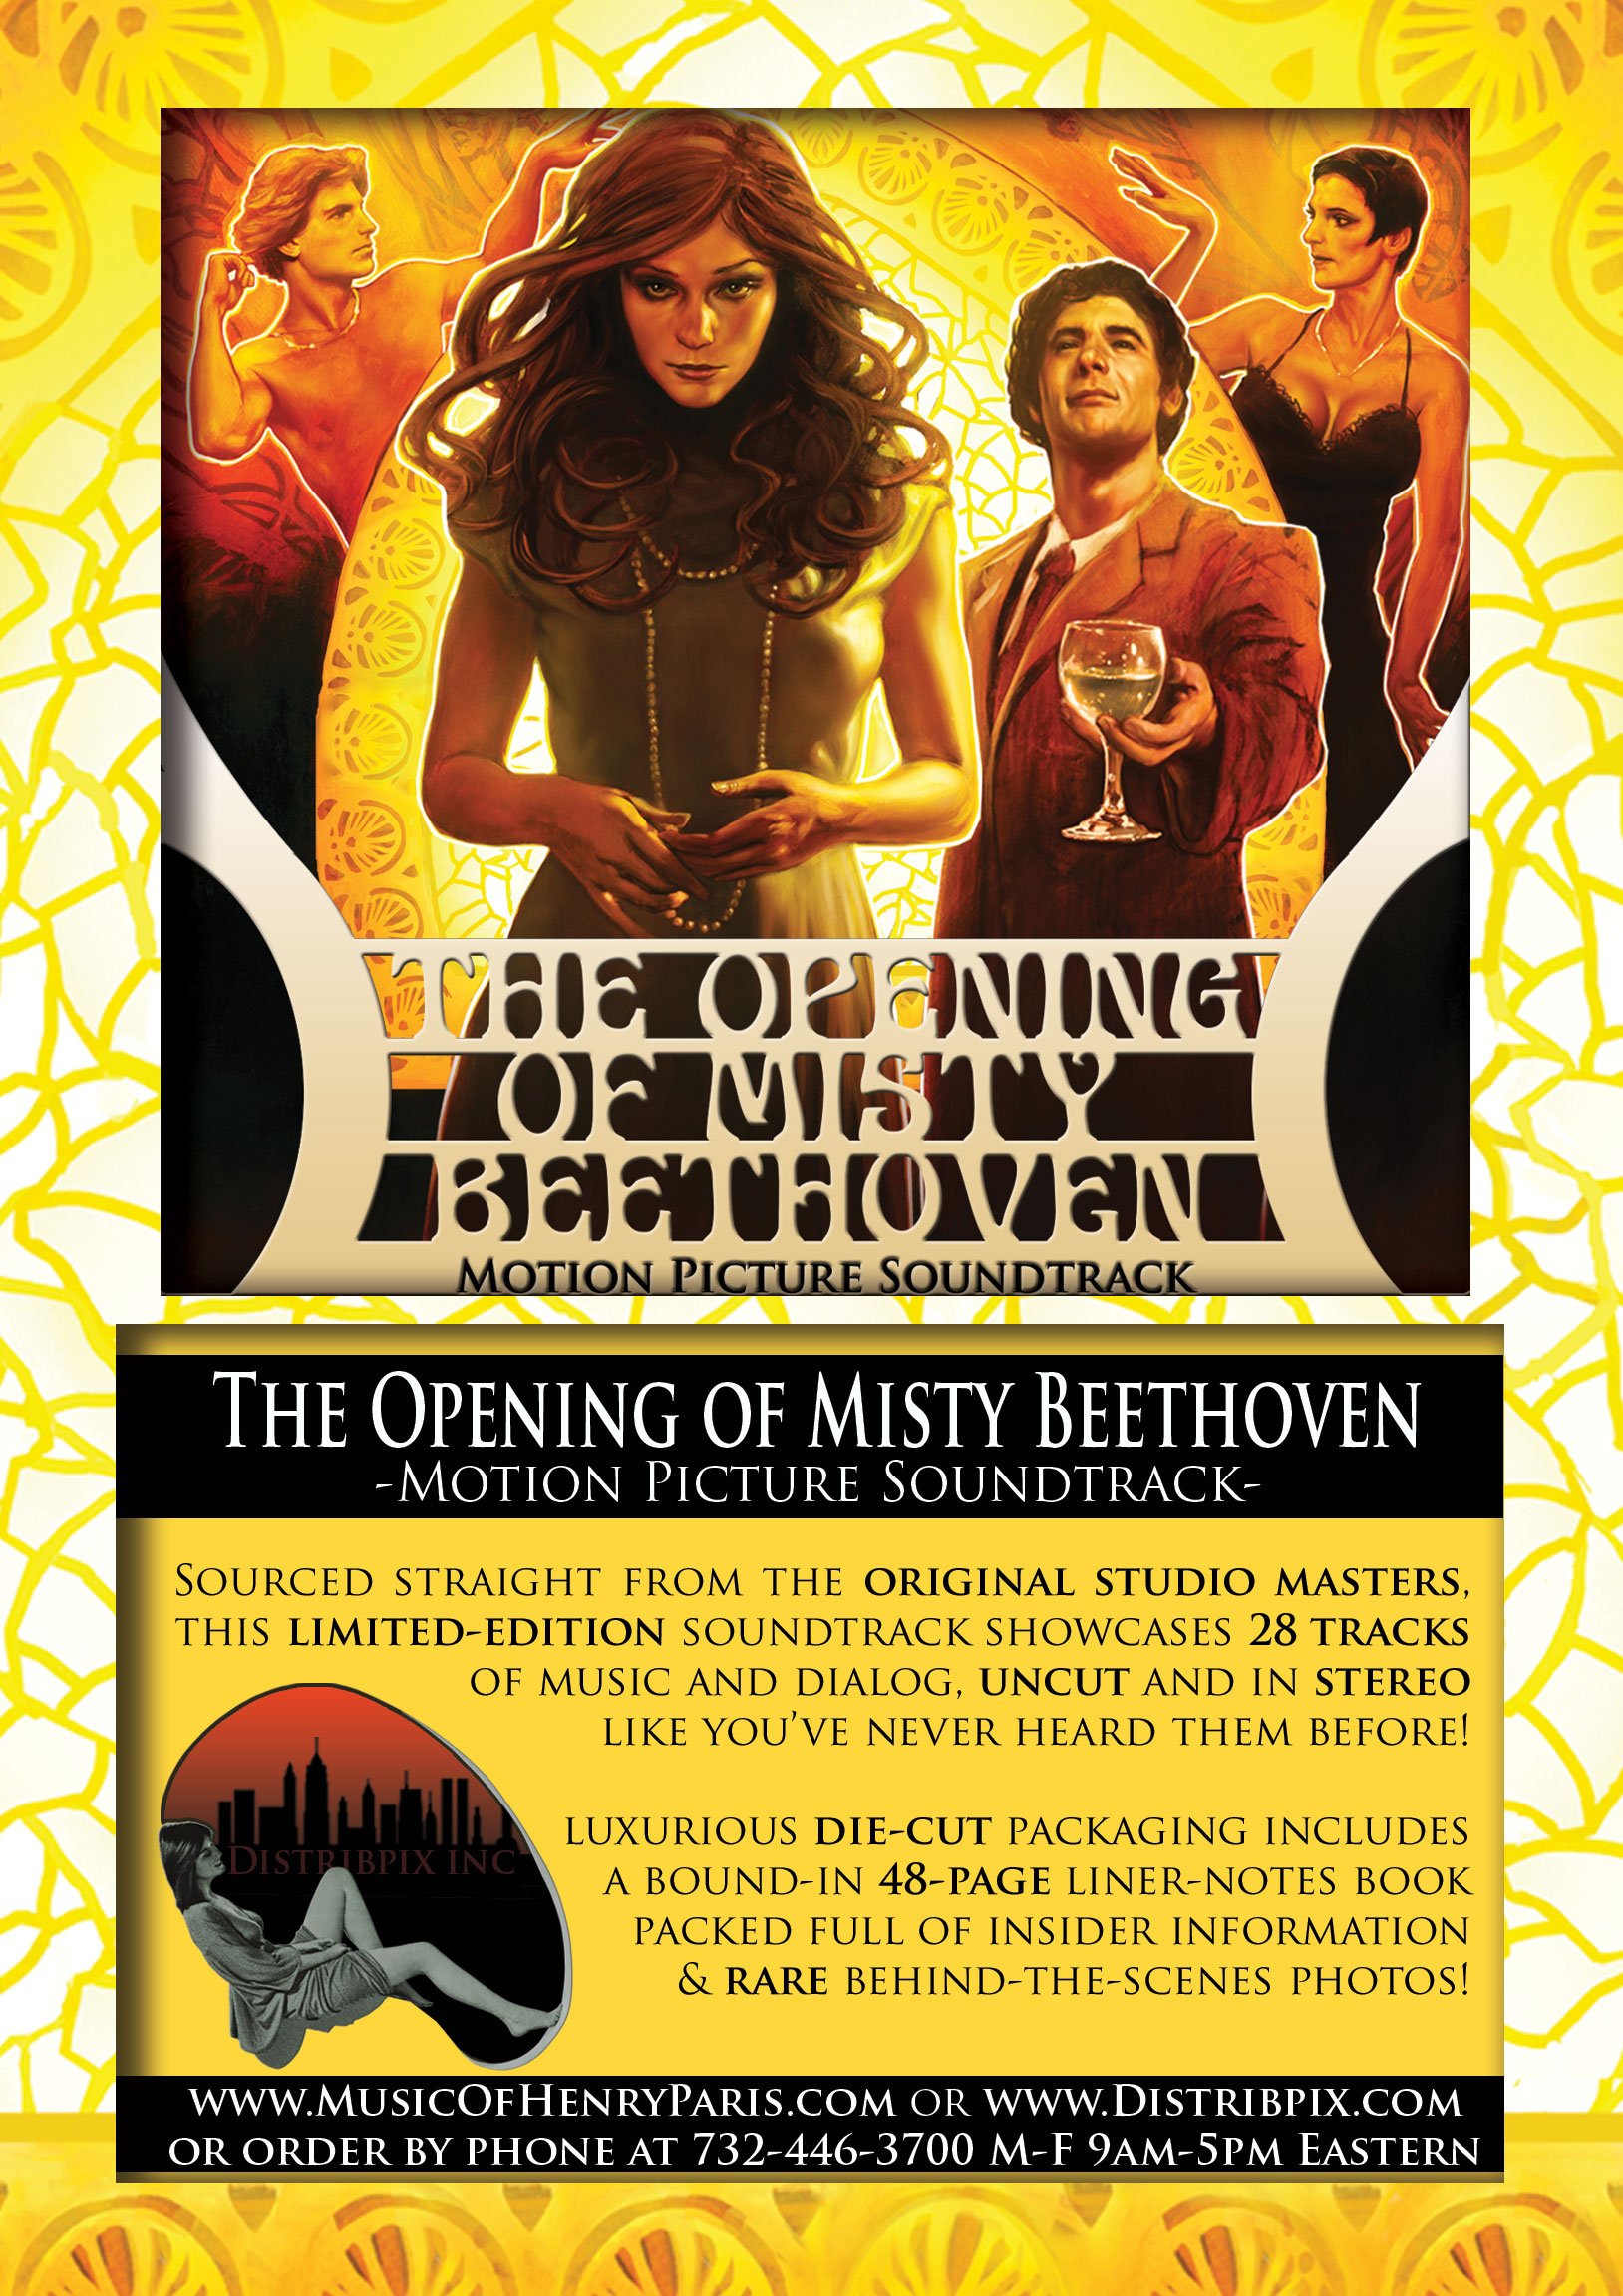 The opening misty beethoven